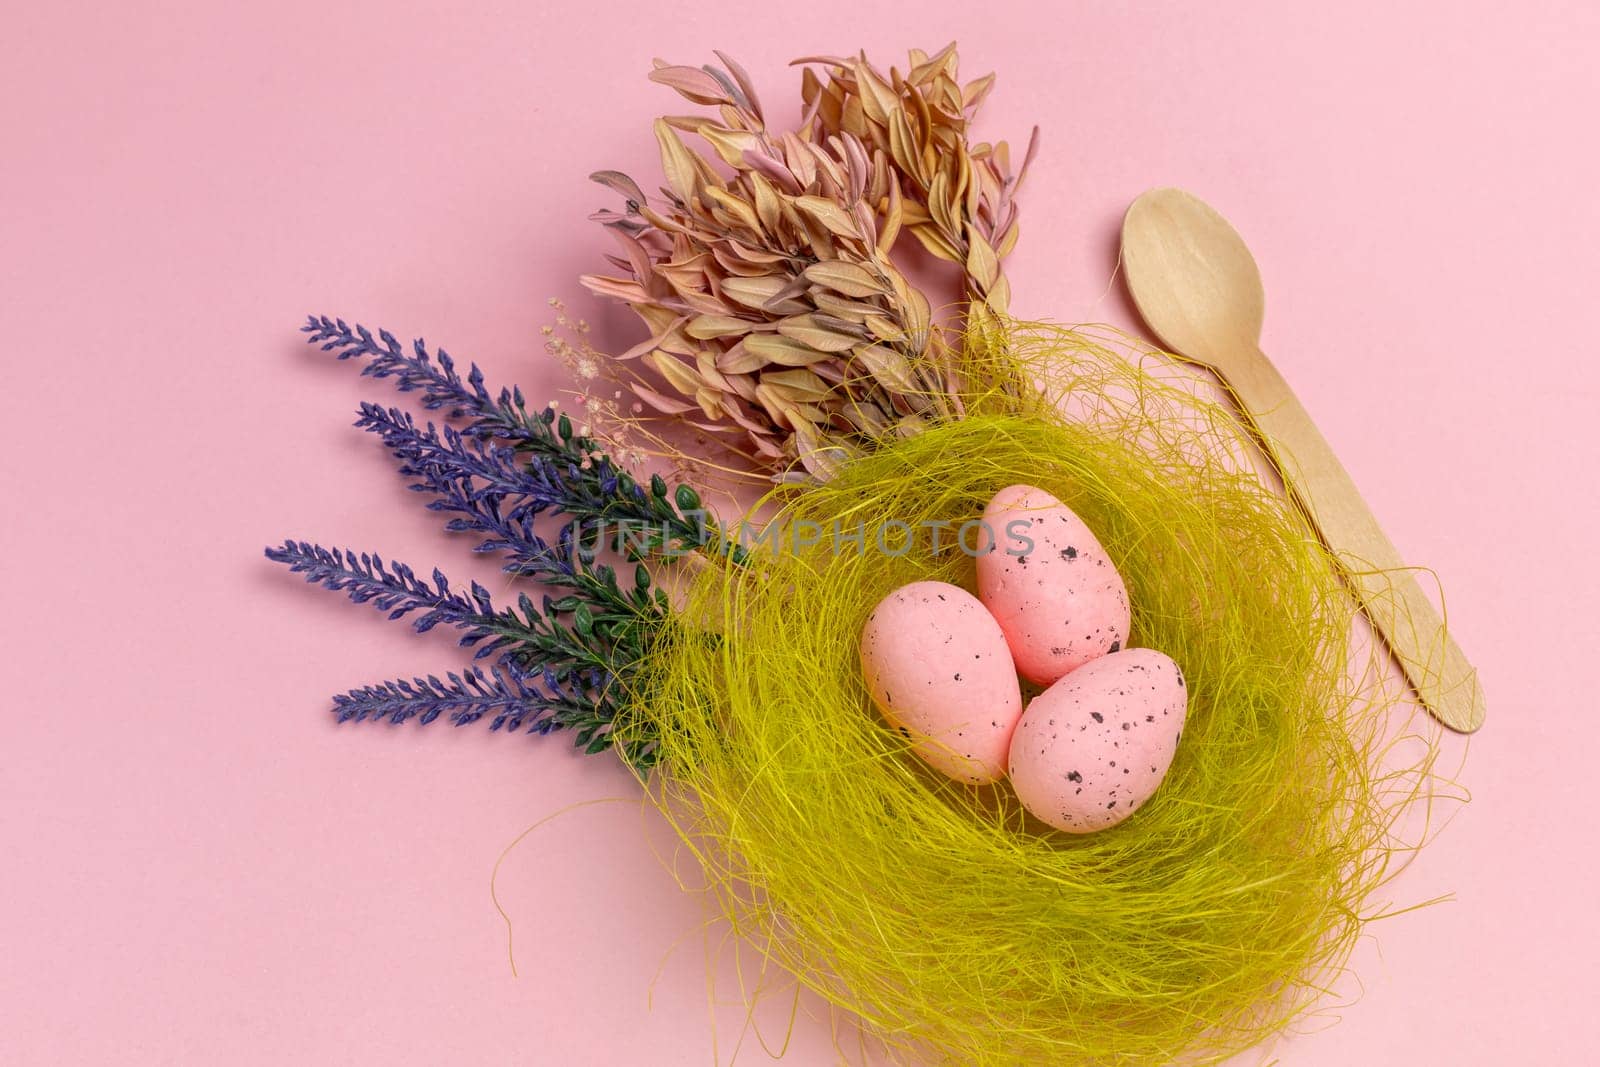 Nest with pink Easter eggs on the pink background with decor plants and a wooden spoon. Top view.